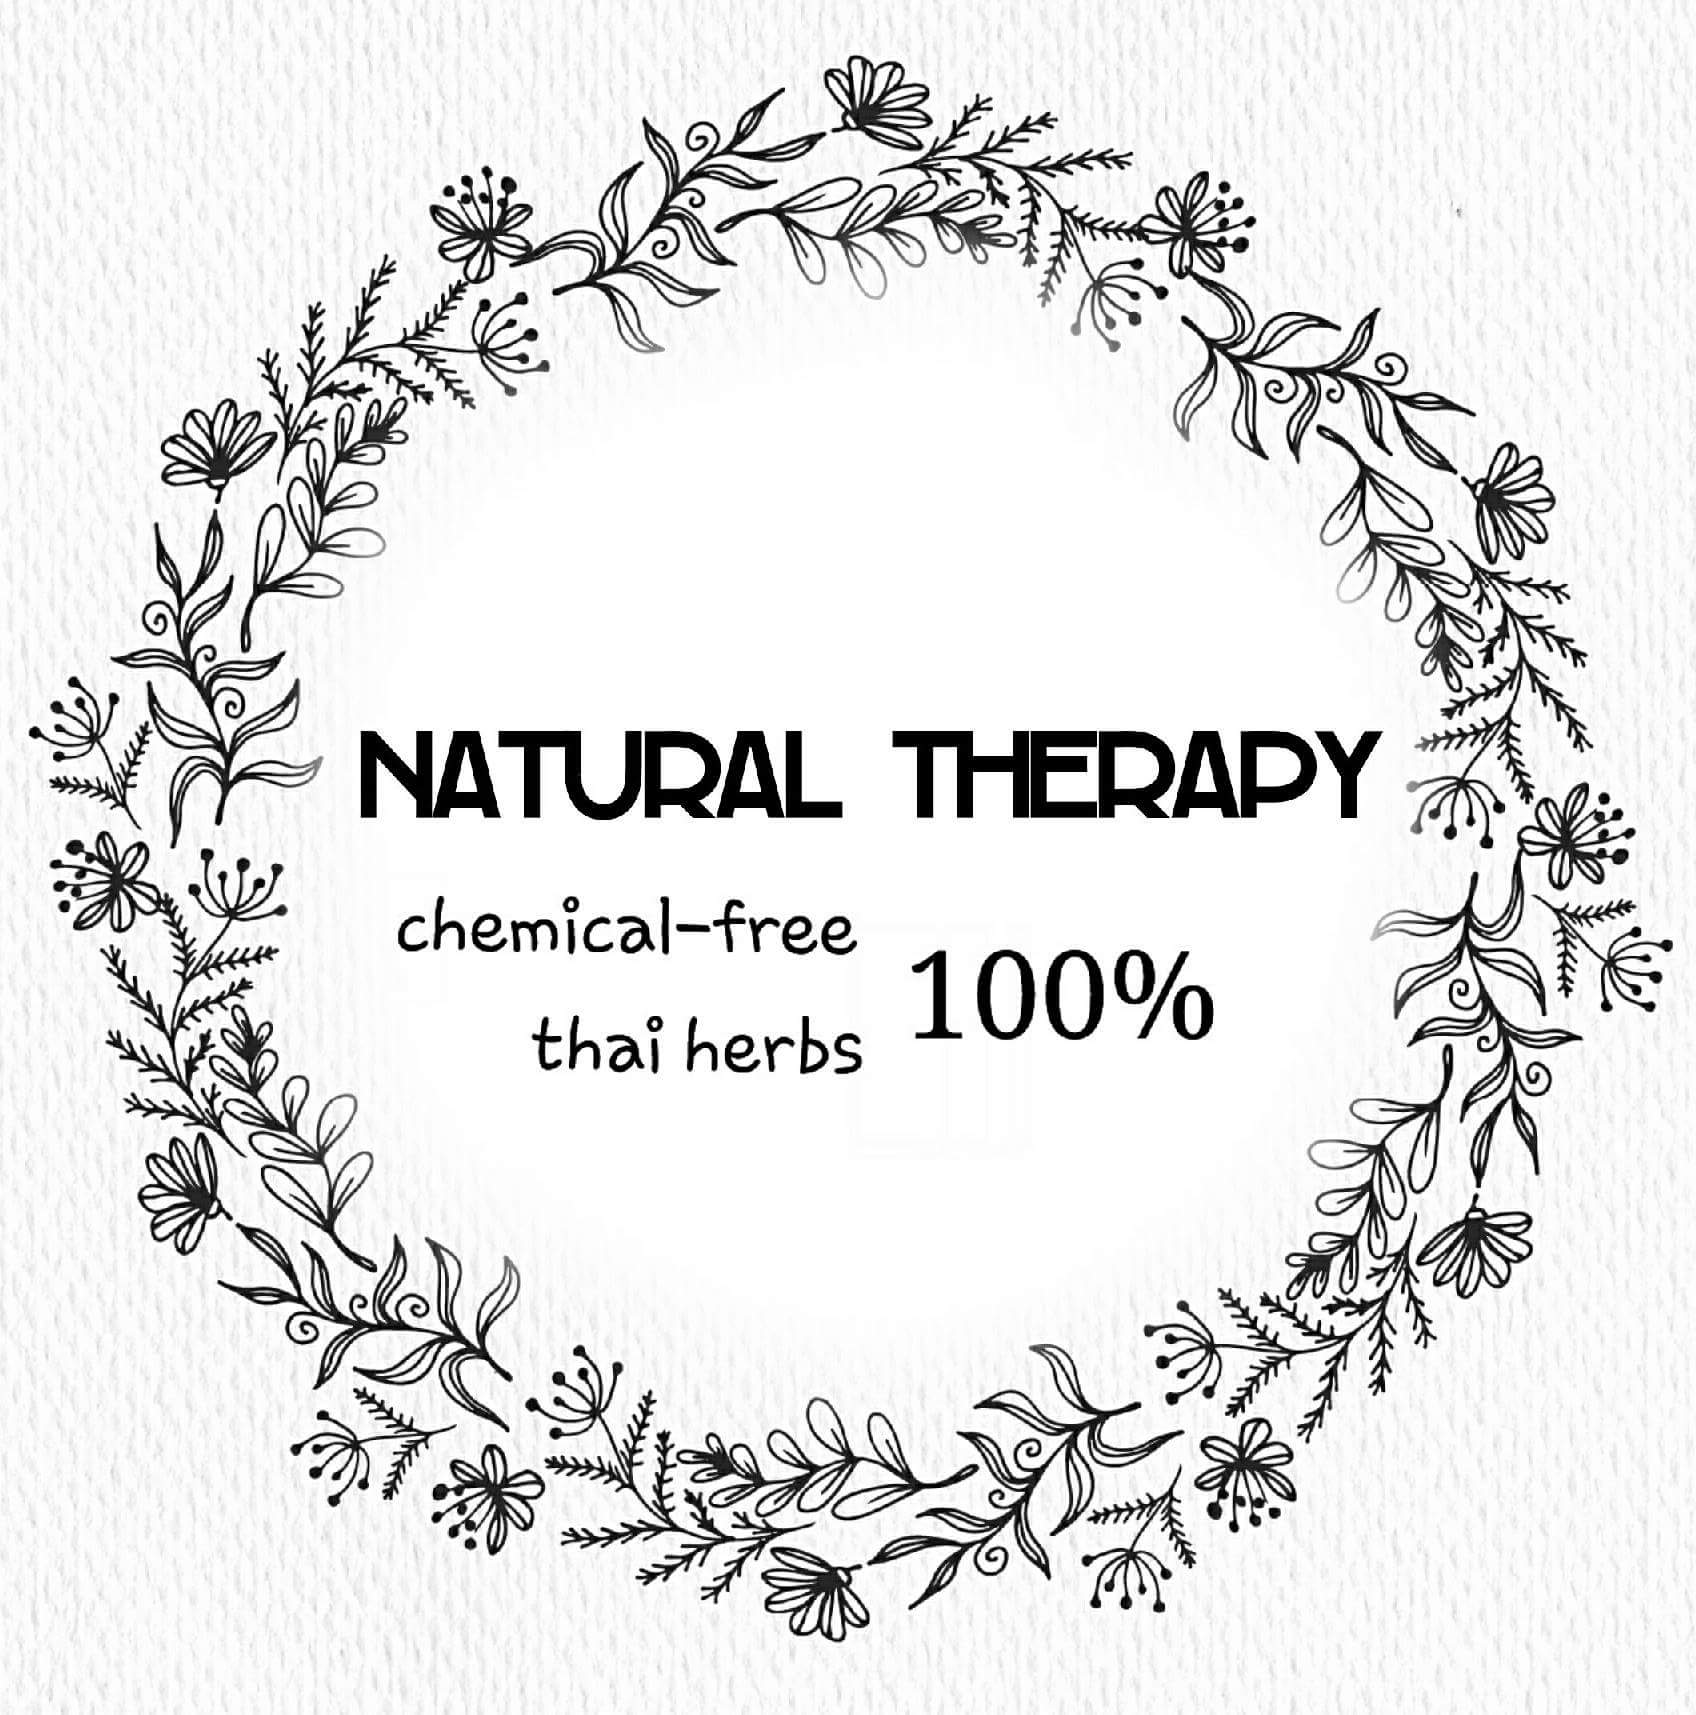 ” natural therapy ”